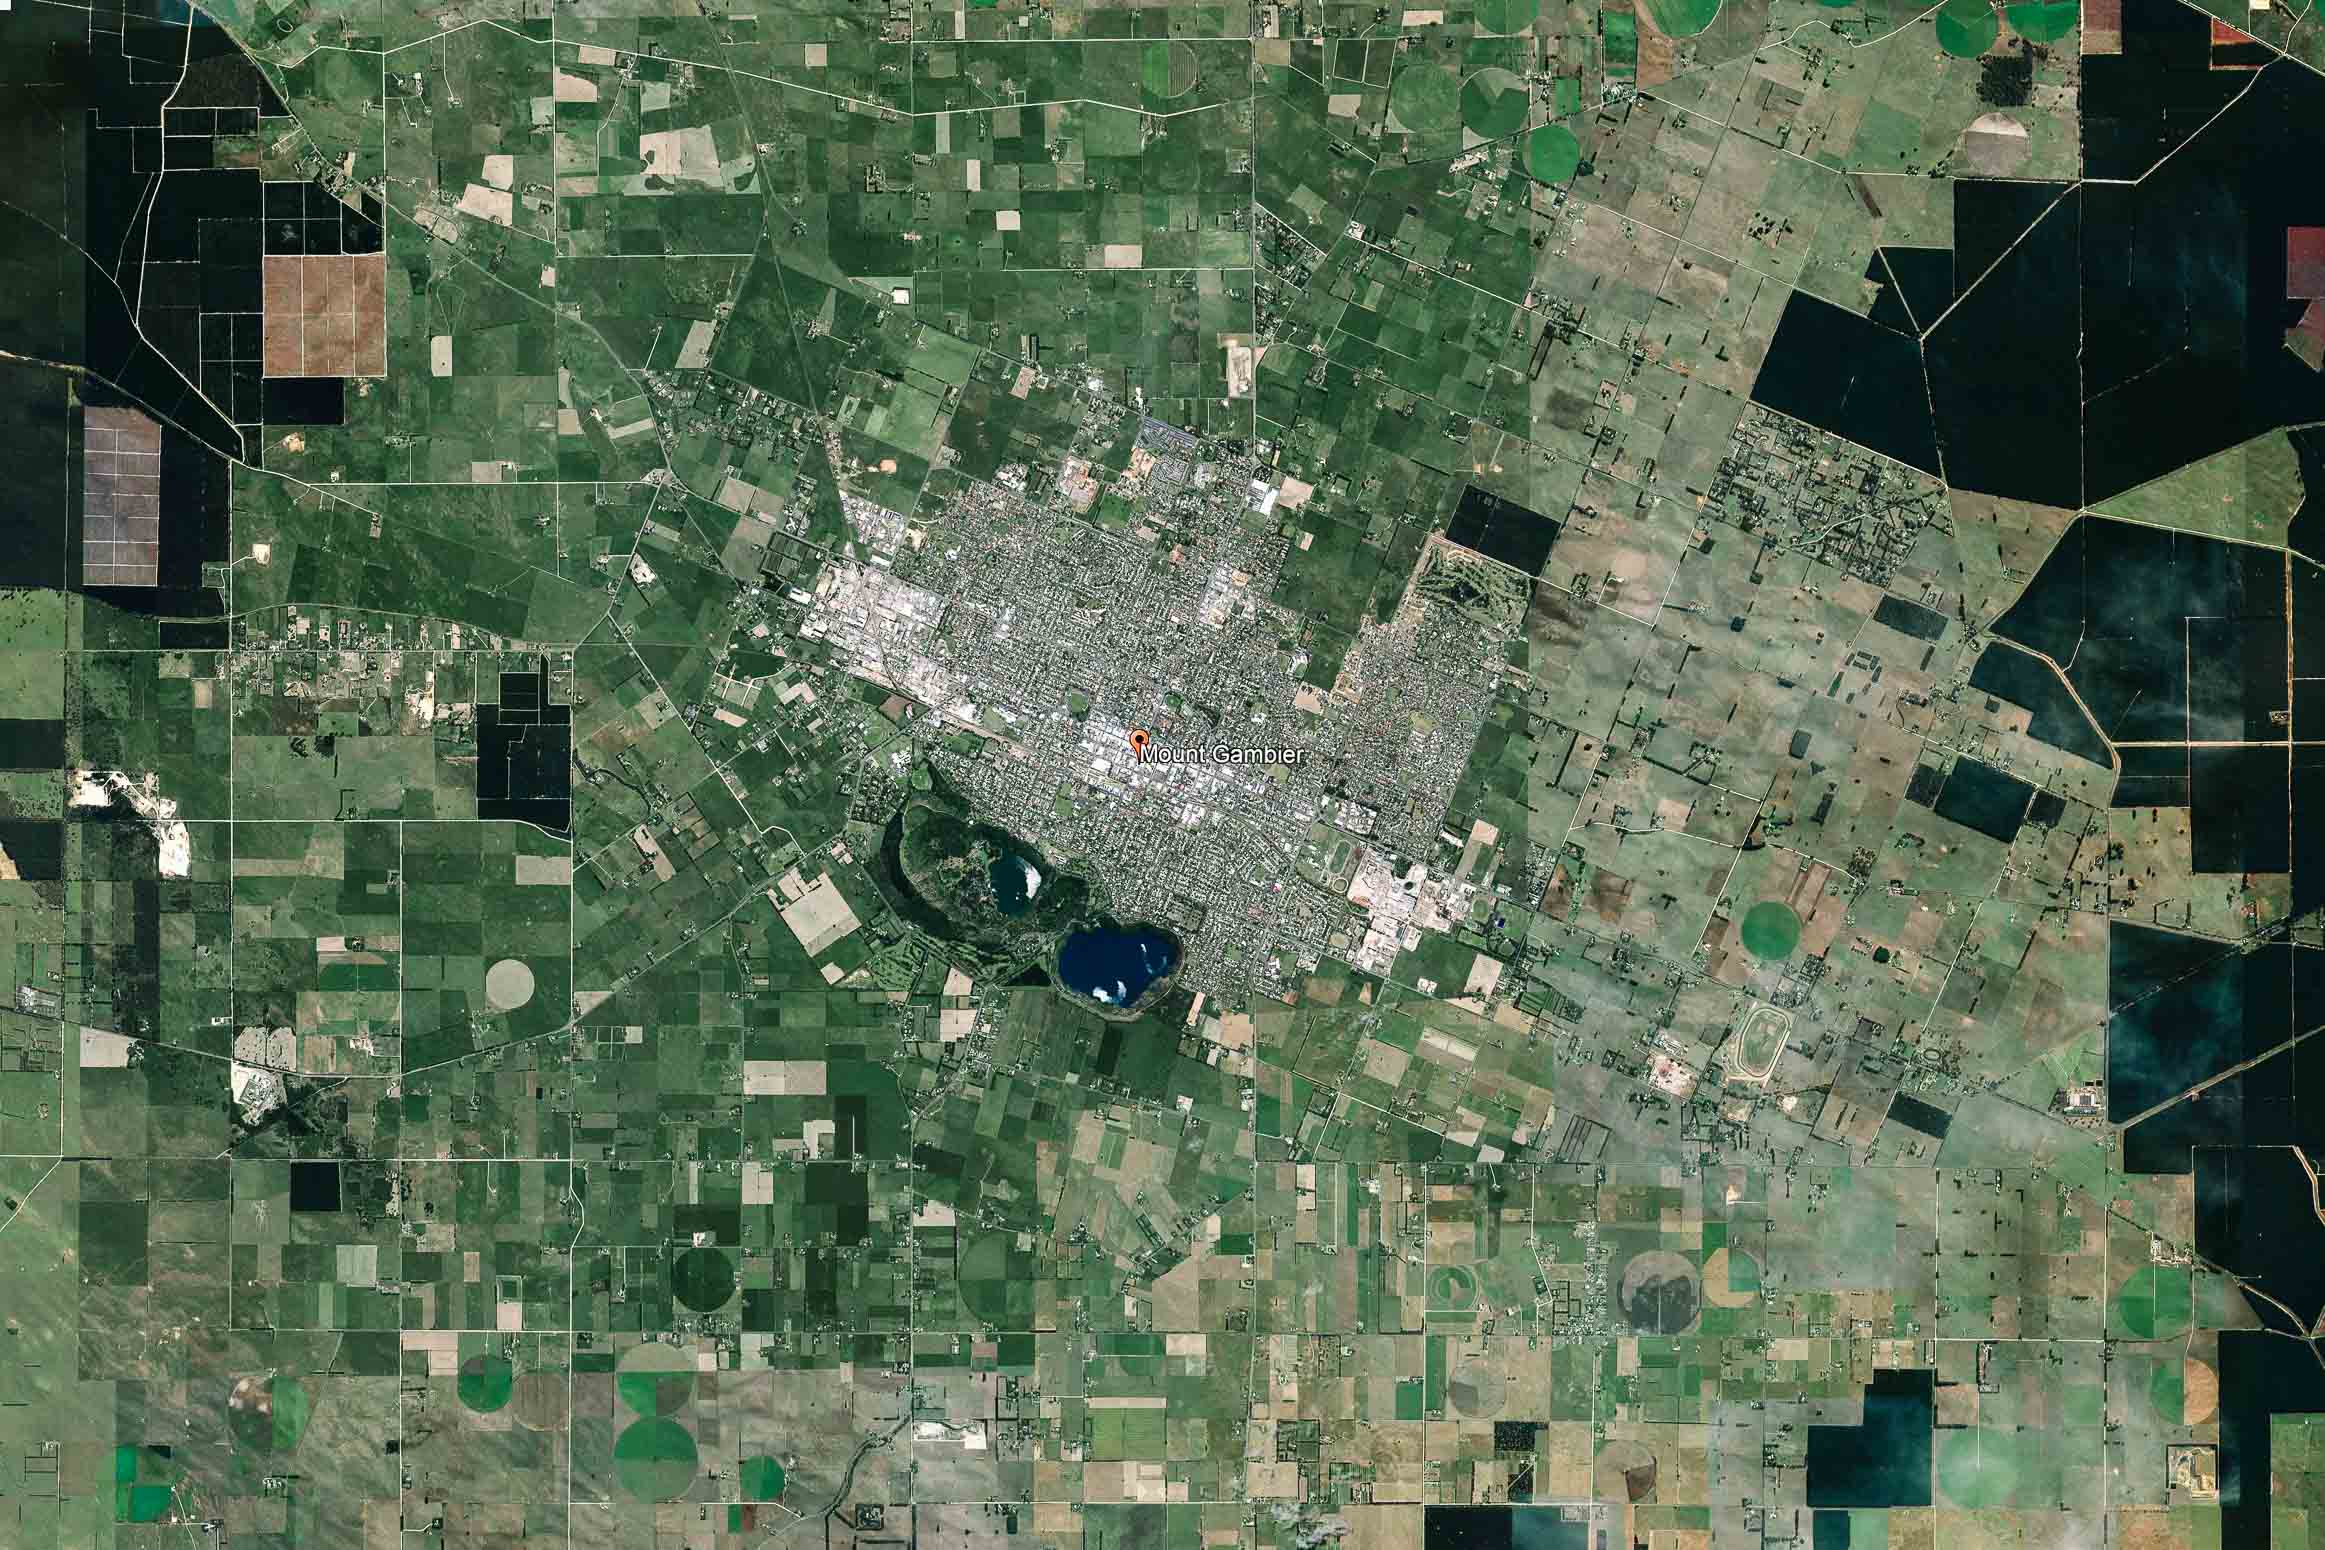 Satellite Imagery of Mt Gambier